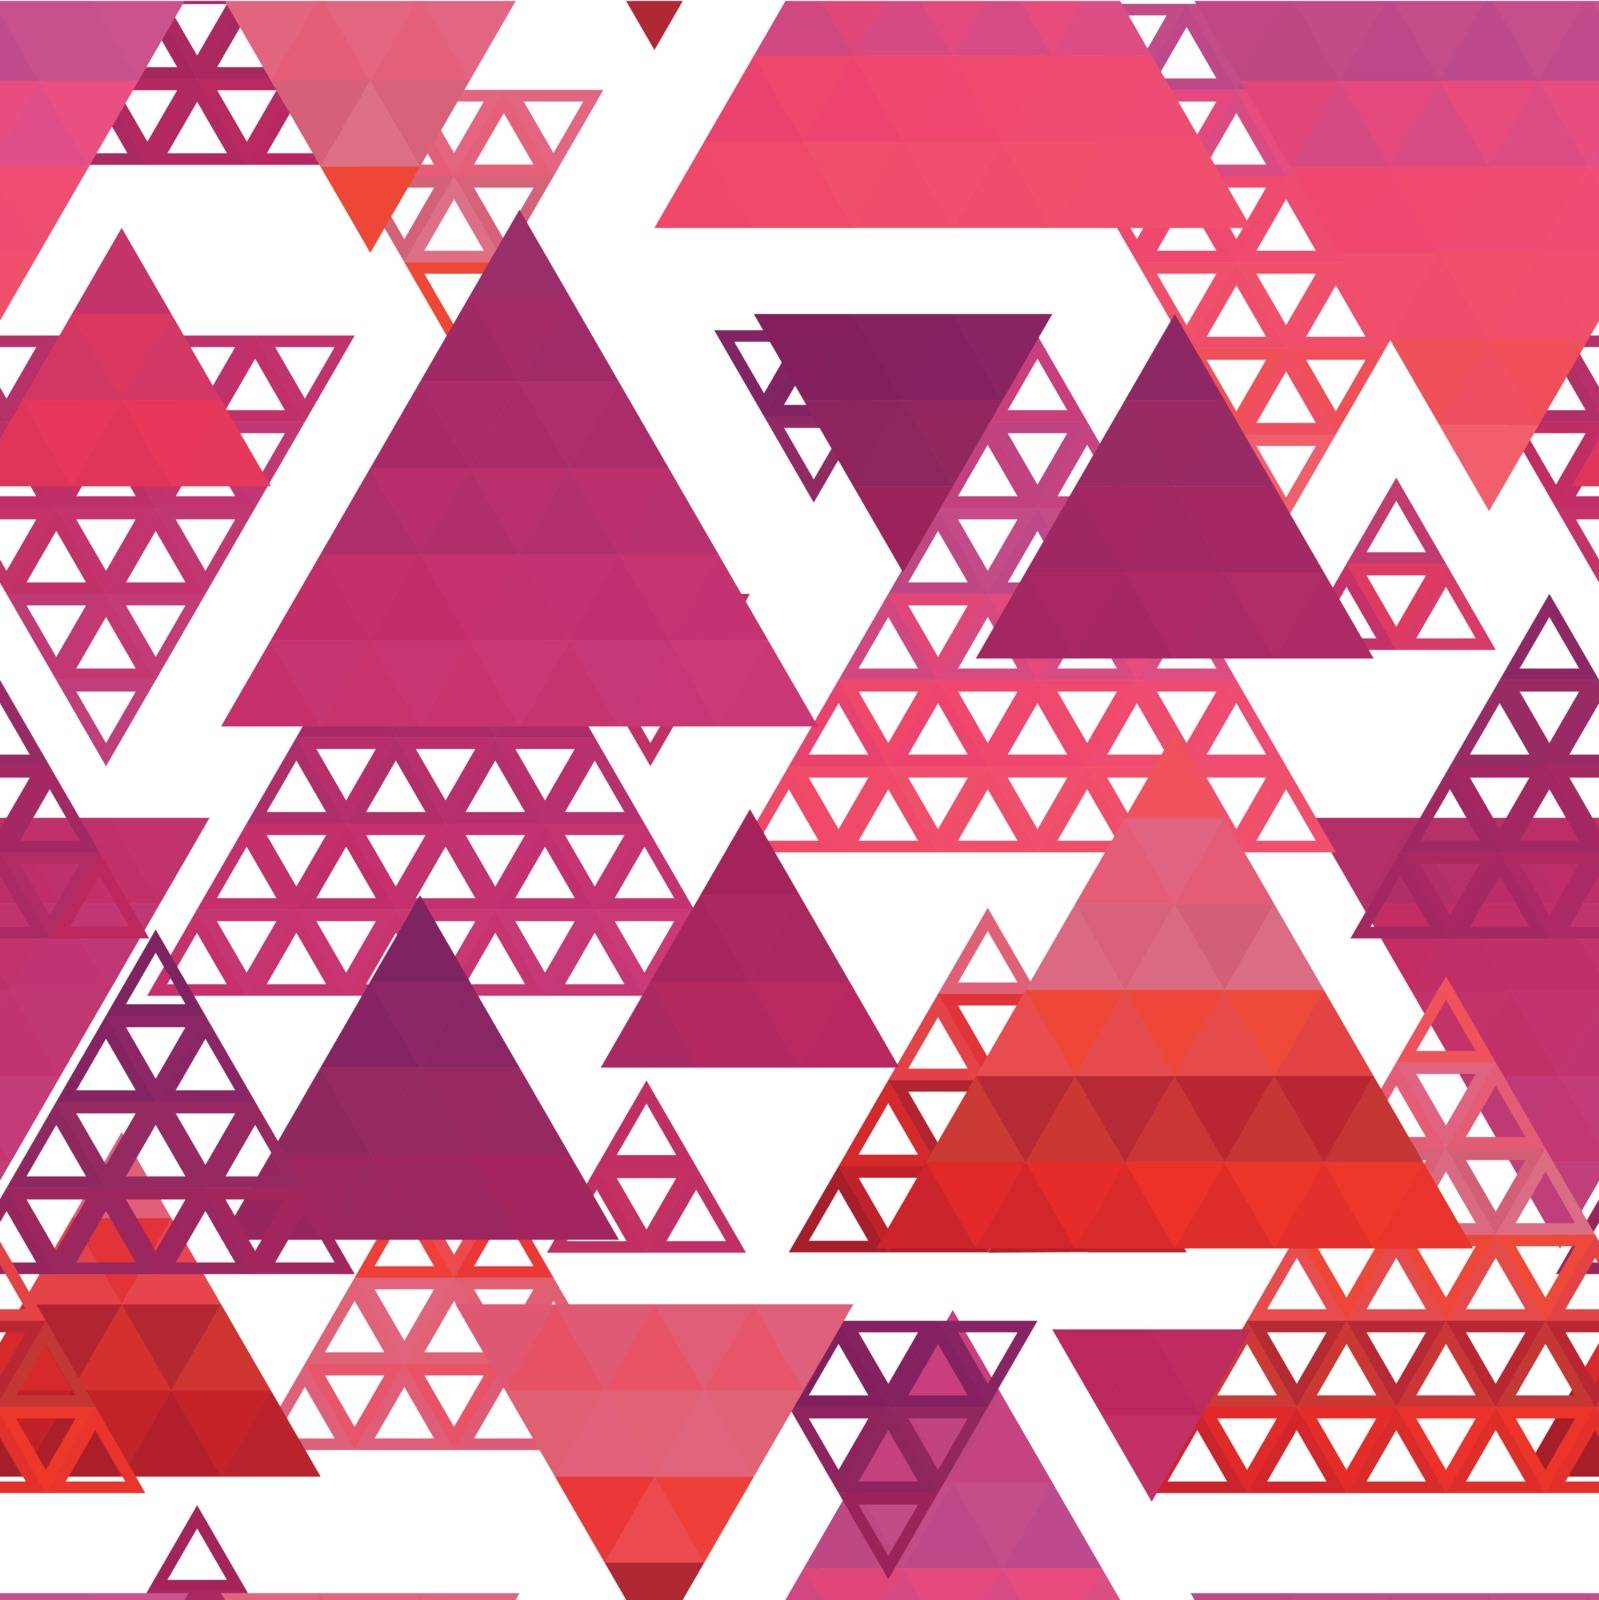 Retro pattern of triangle shapes. Colorful mosaic backdrop. Geometric hipster retro background, place your text on the top. Triangle background.